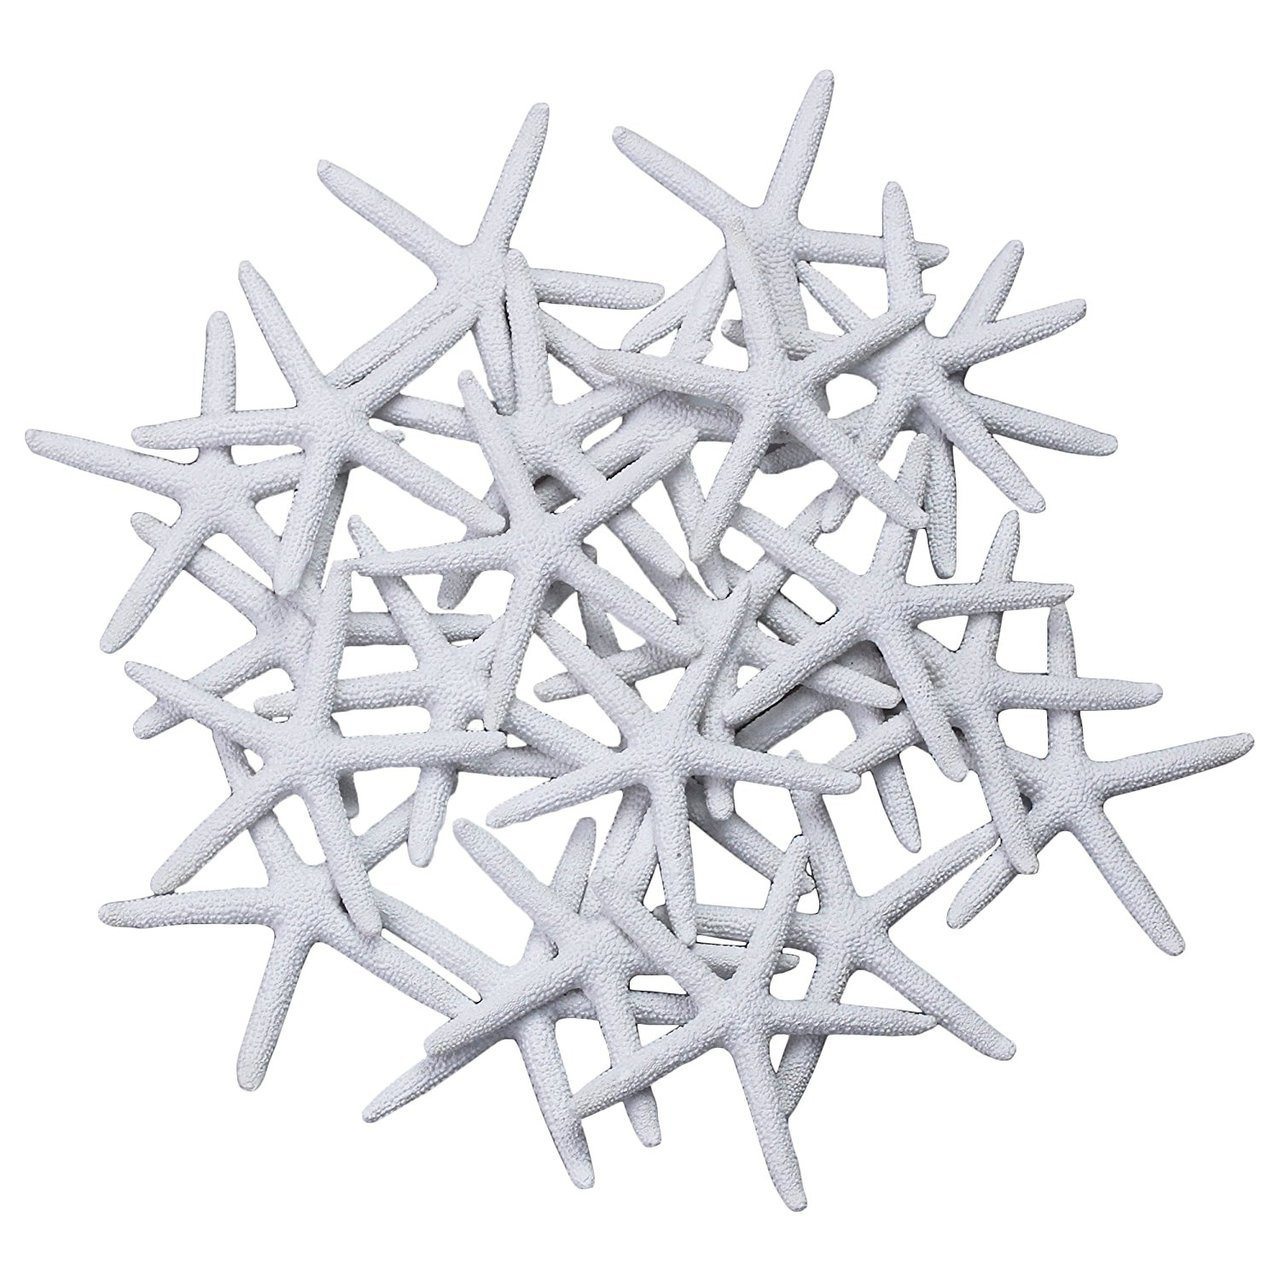 AHIER Light Blue Starfish Decor, Starfish Ornaments, 30 Pieces Small Finger  Resin Starfish for Crafts and Wedding Home Decor